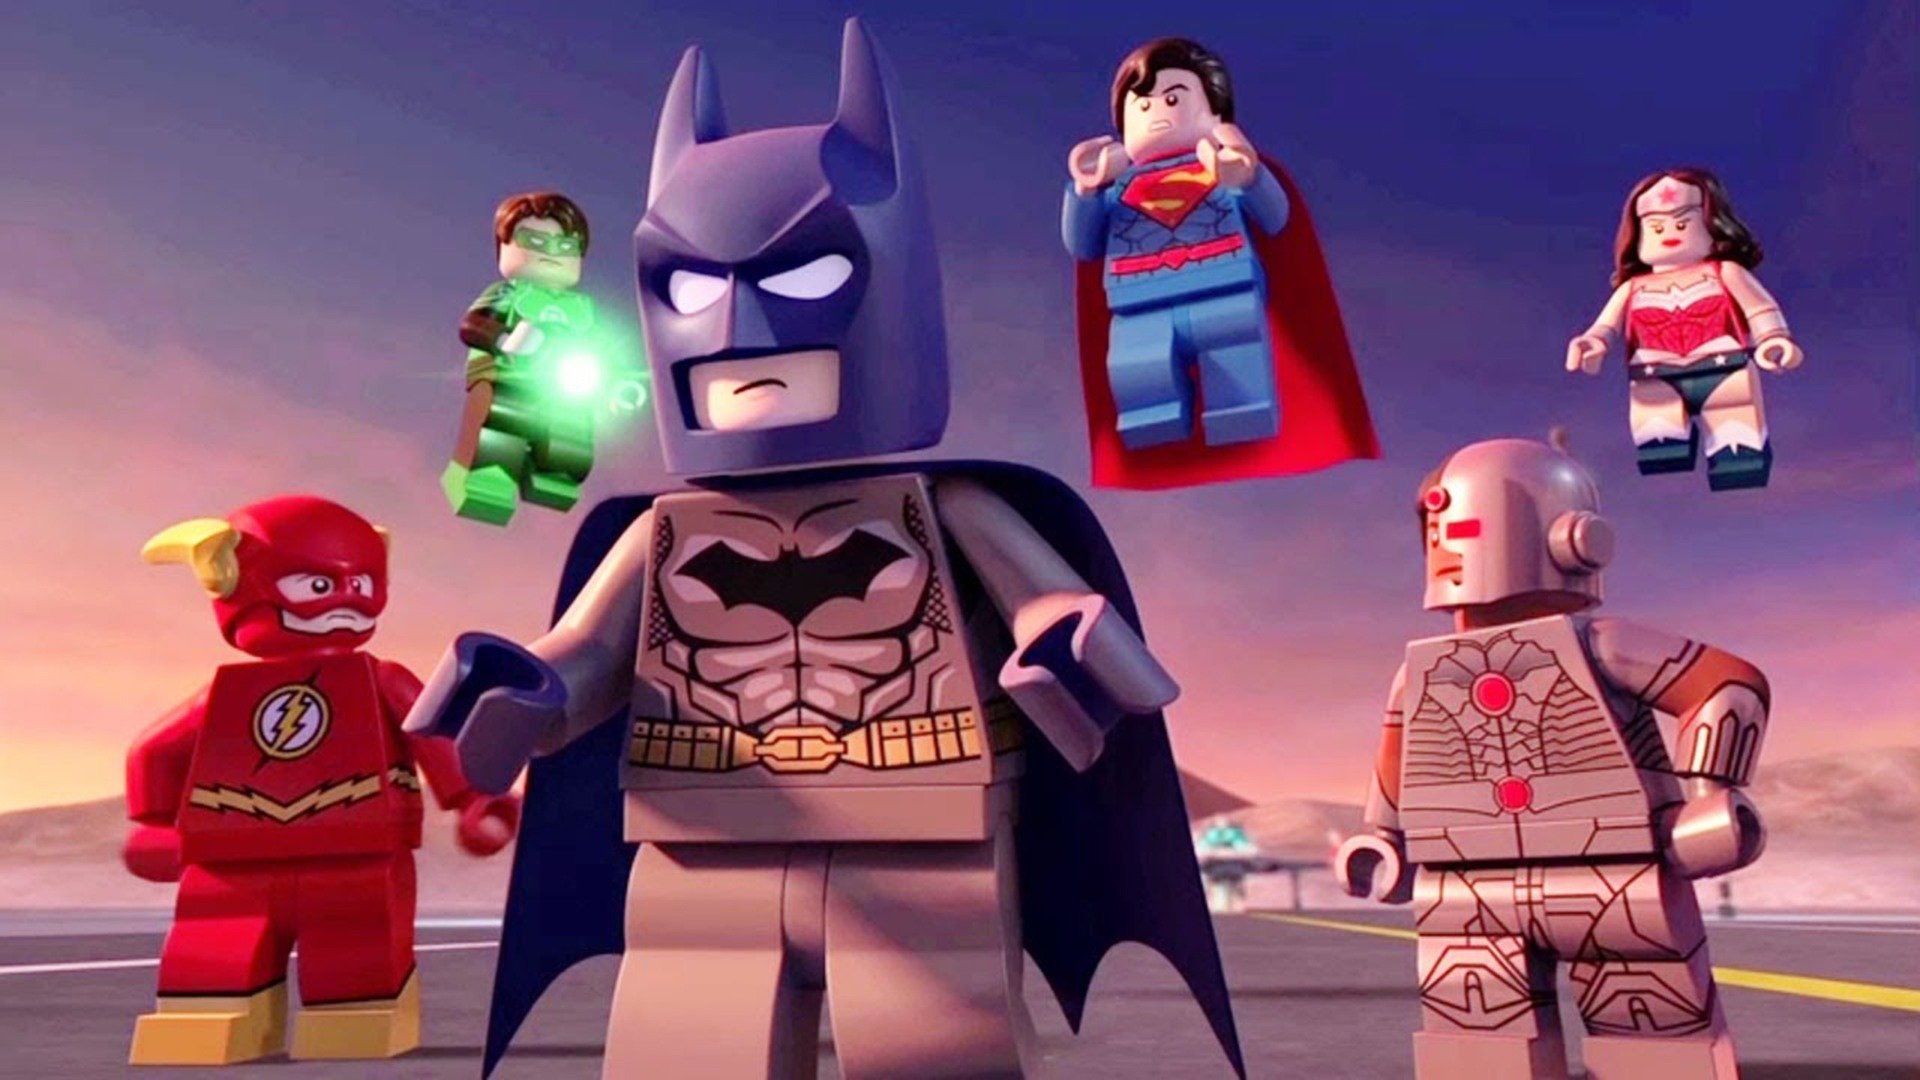 Lego DC Super Heroes: Justice League - Attack of the Legion of Doom! Backdrop